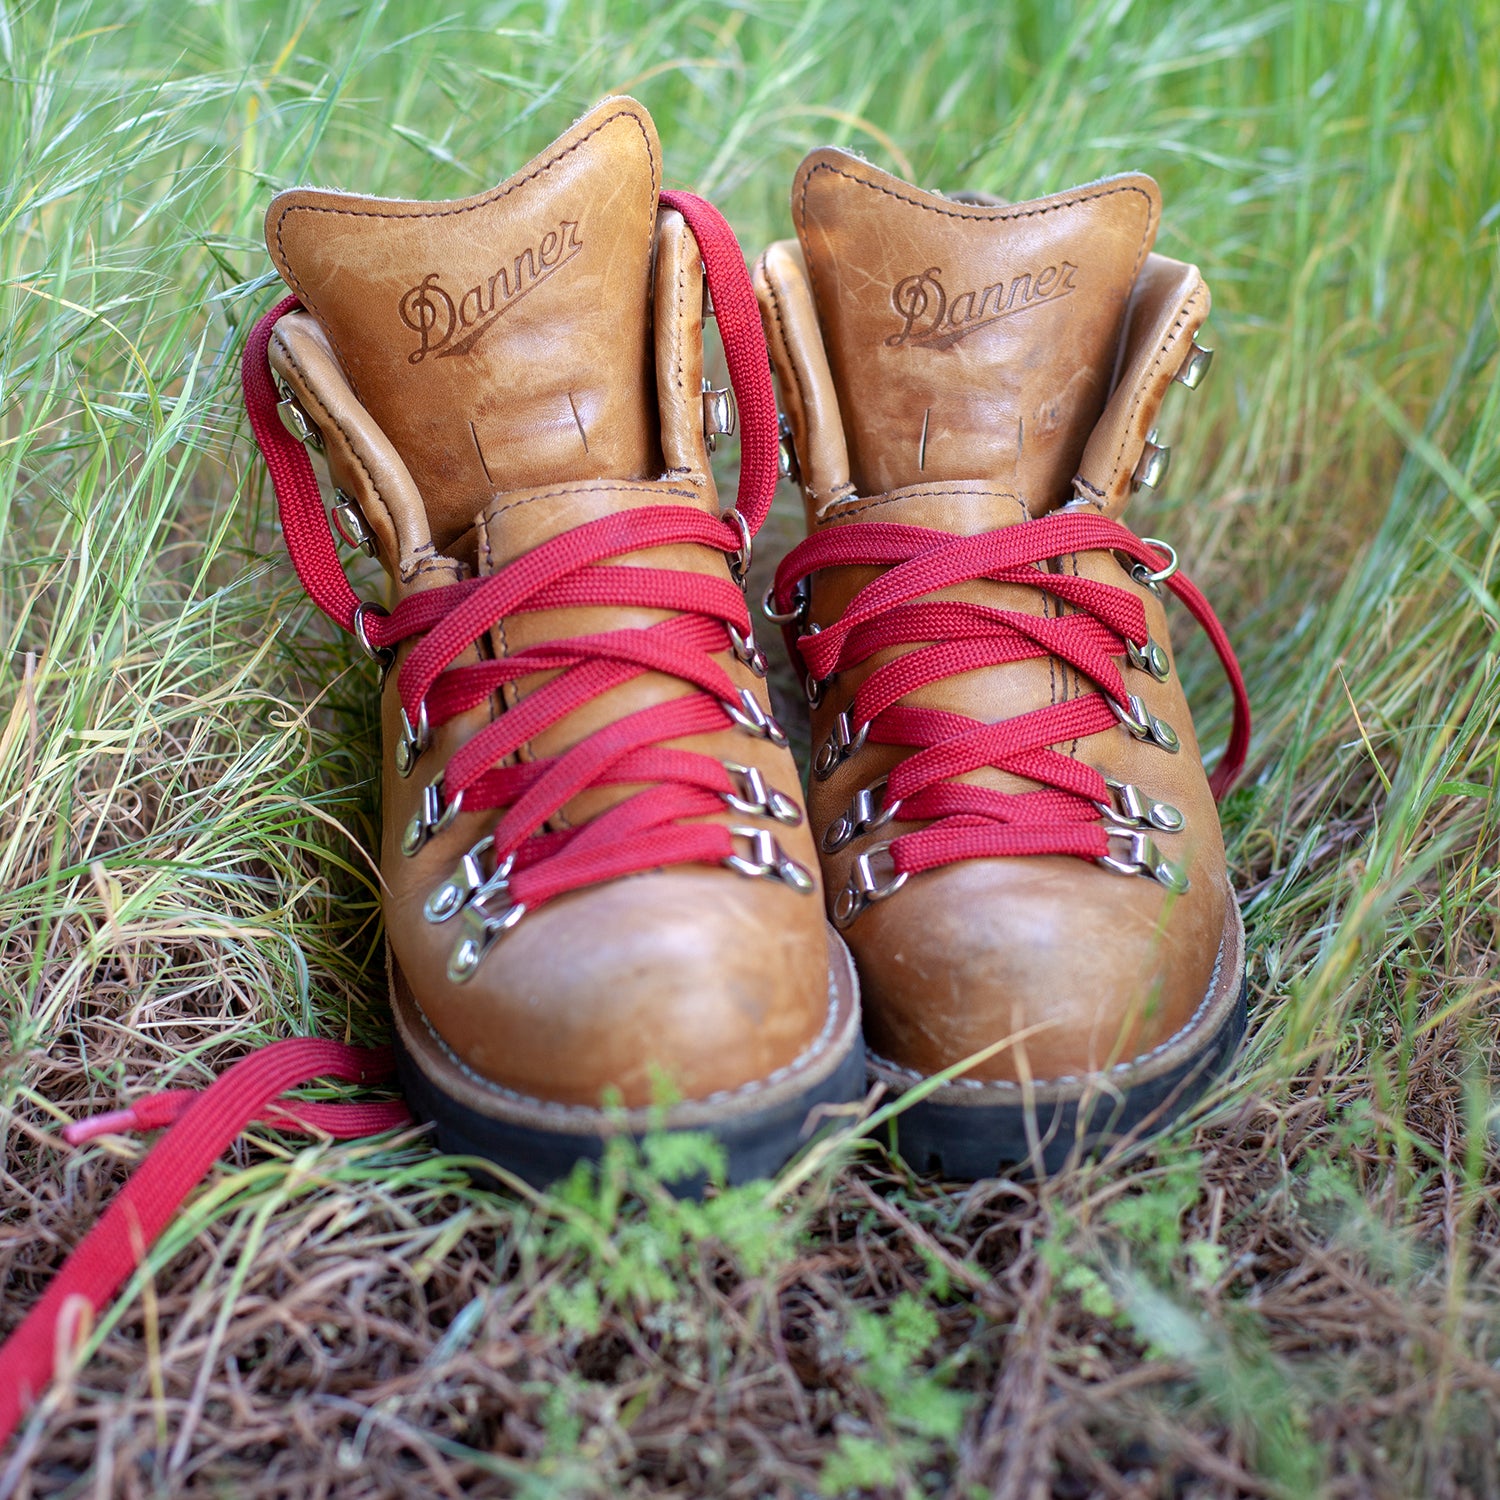 How to repair worn hiking boot eyelets - The Great Outdoors Stack Exchange